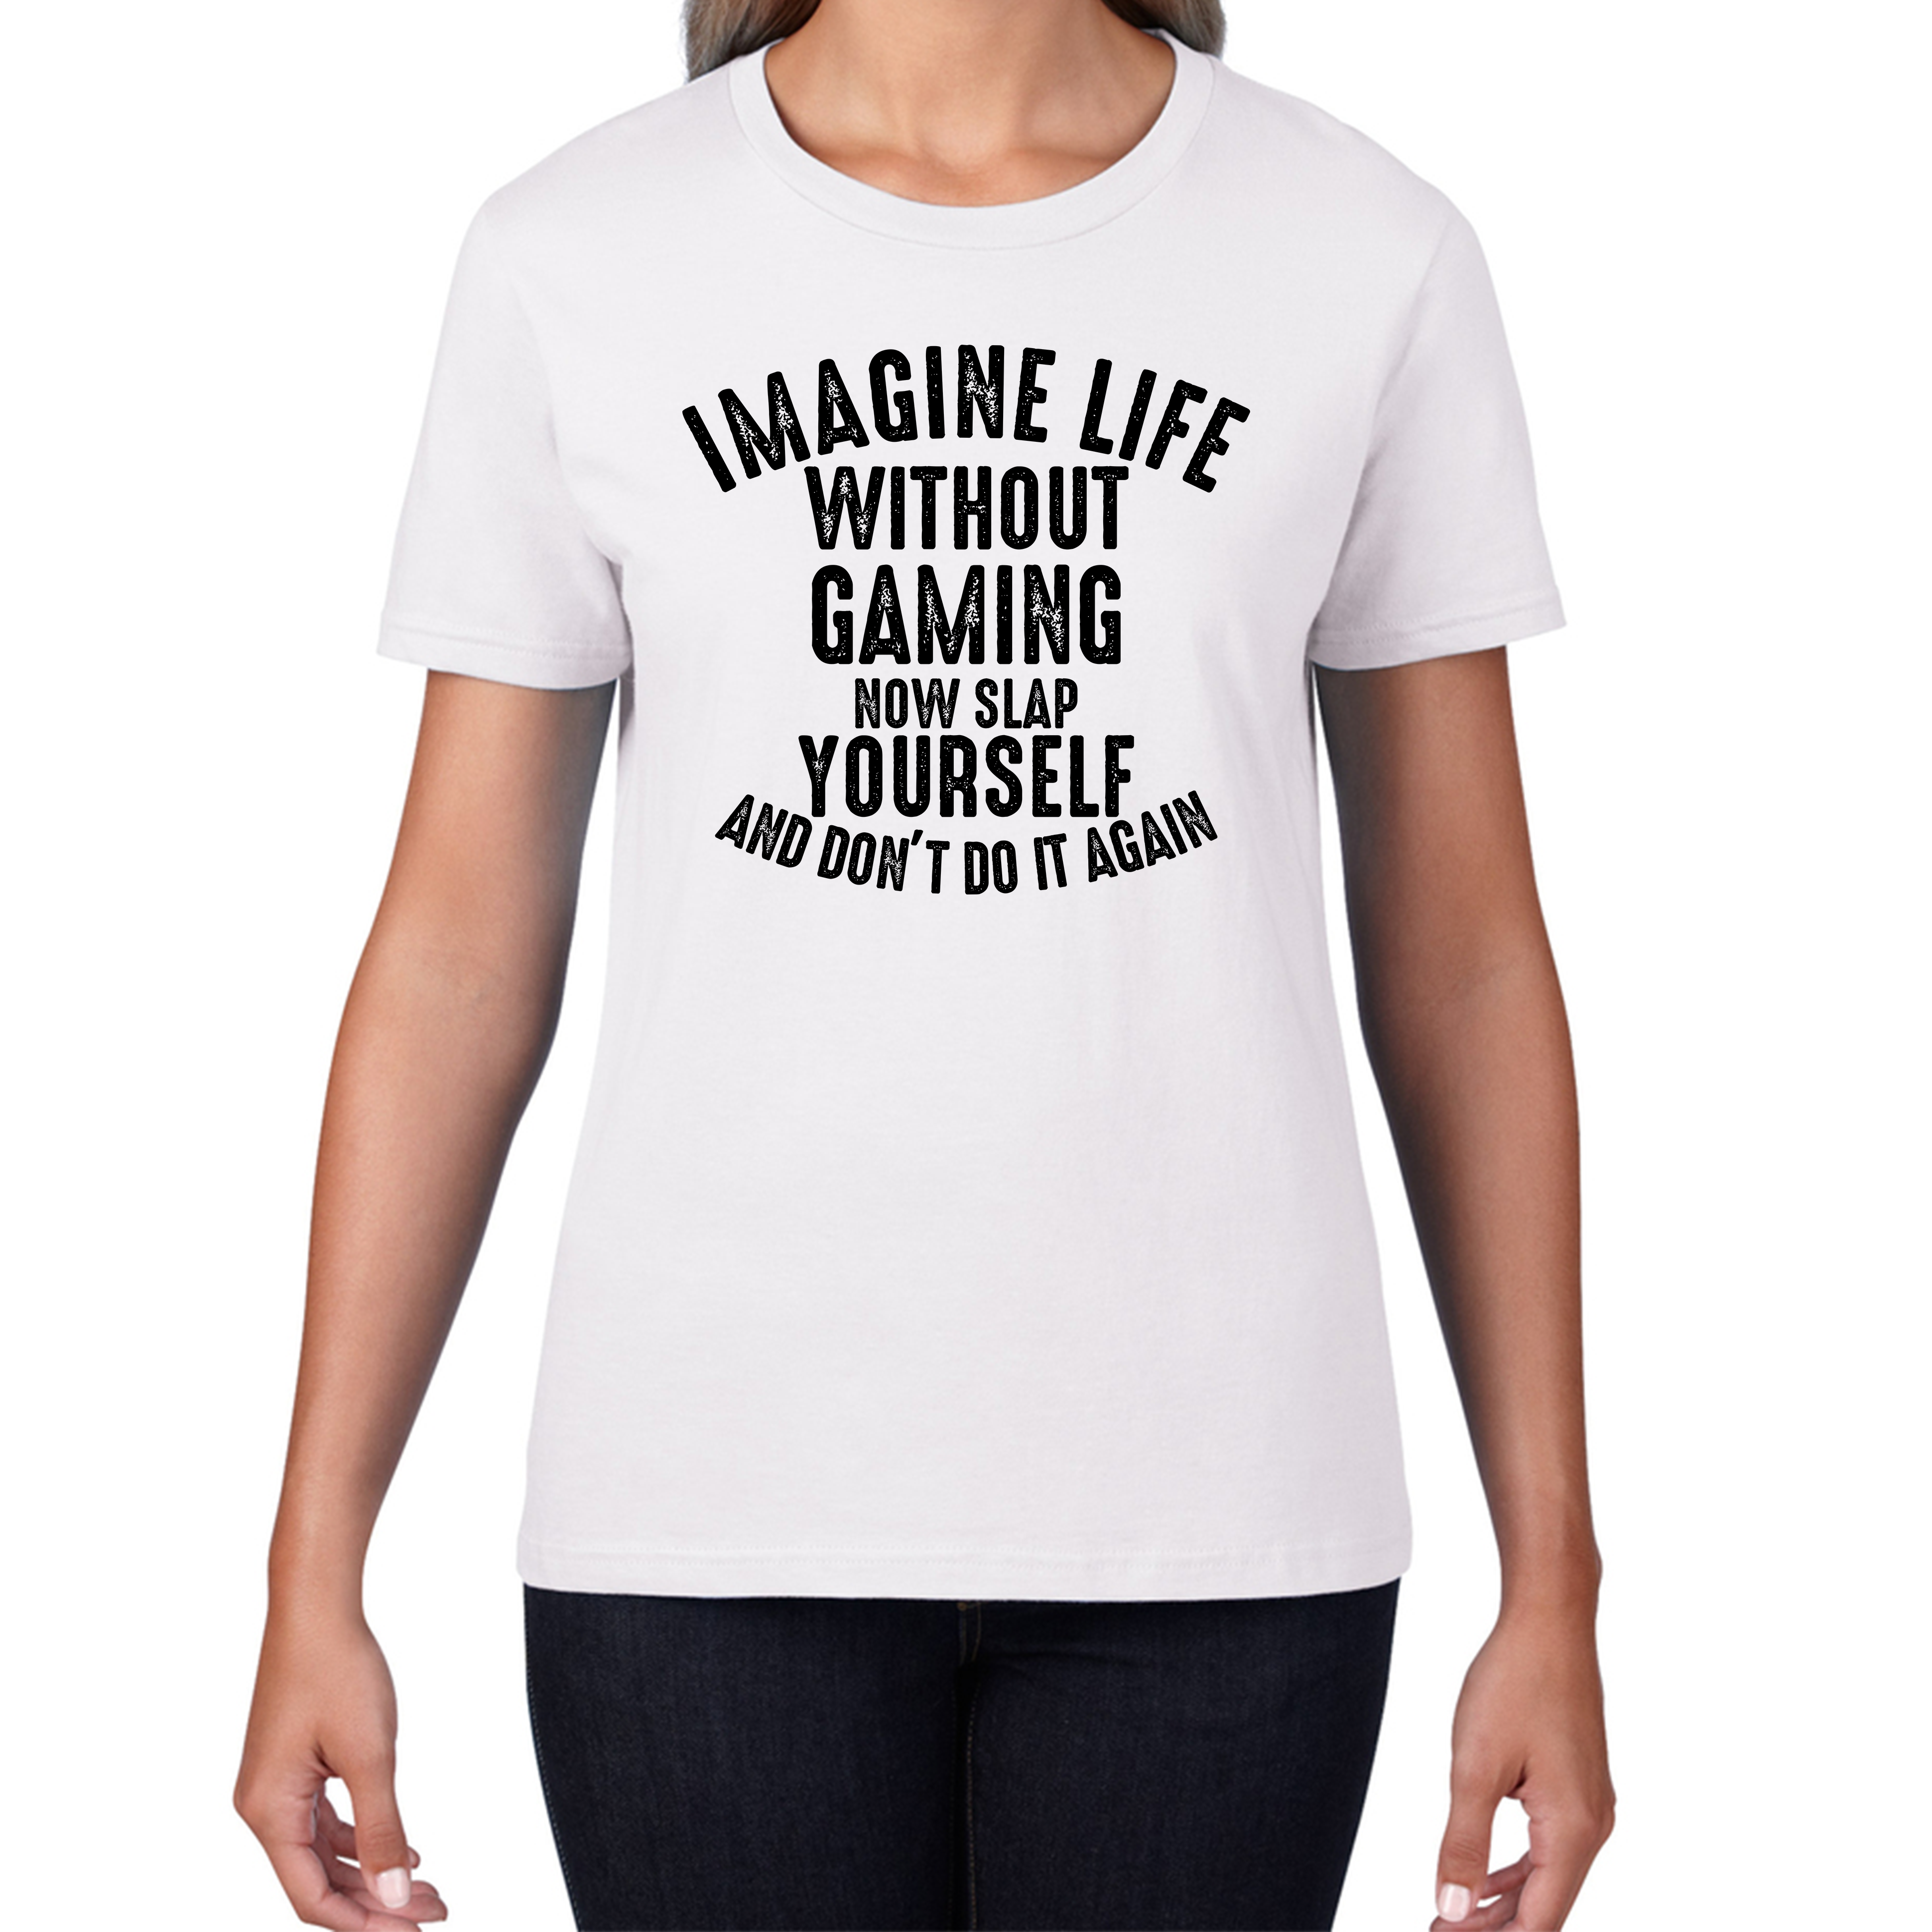 Imagine Life Without Gaming Now Slap Yourself And Don't Do It Again T-Shirt Gamer Players Game Lovers Funny Womens Tee Top